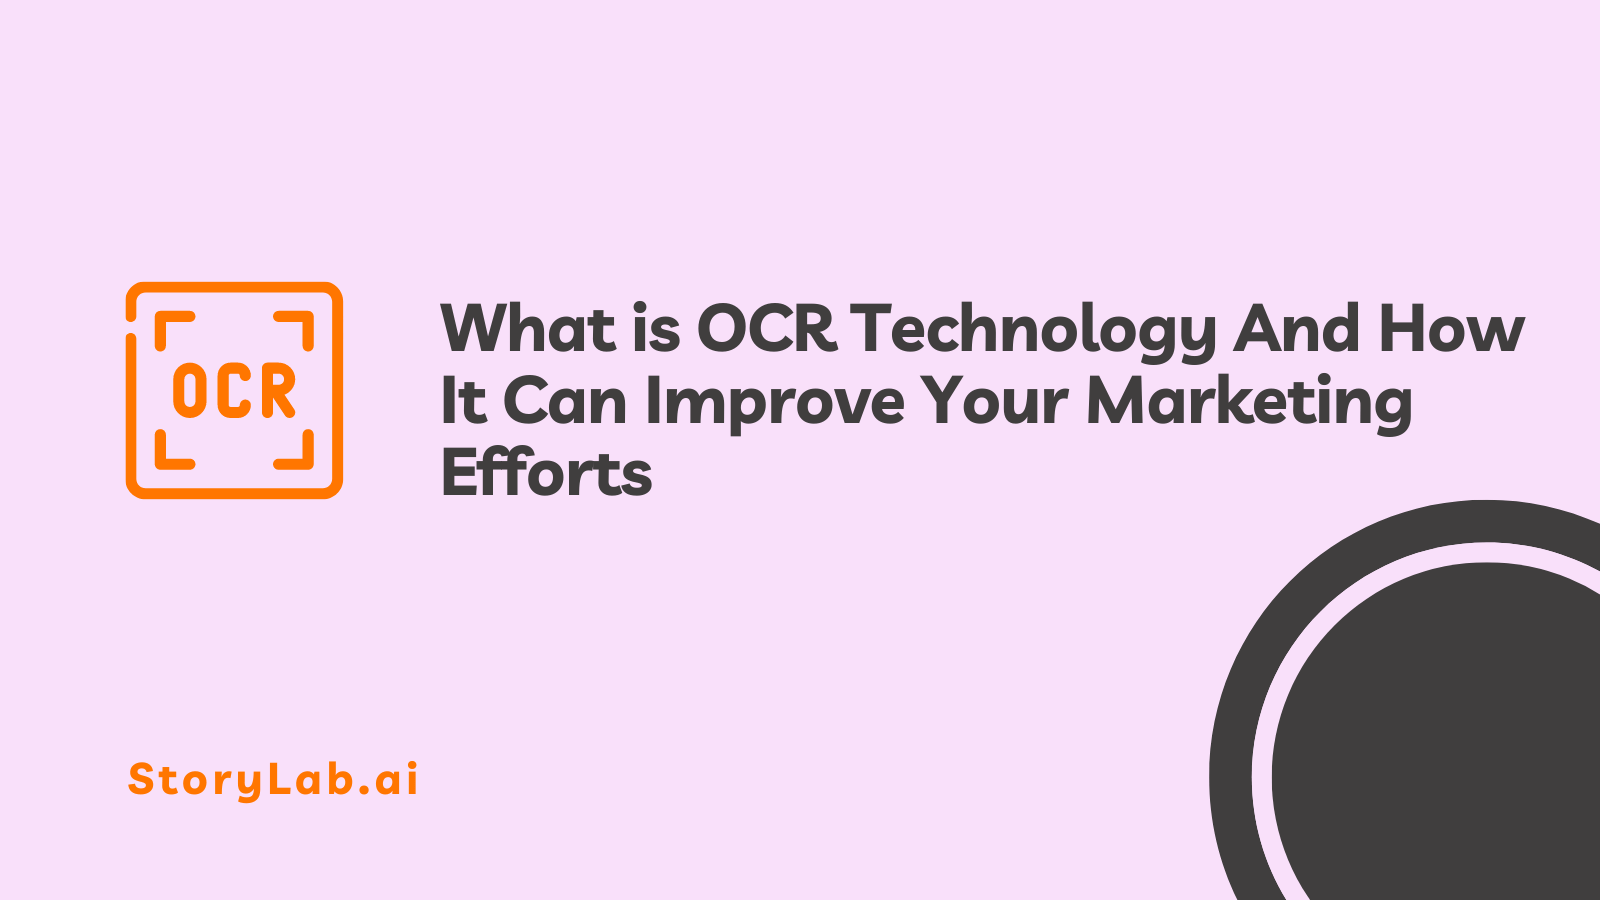 What is OCR Technology And How It Can Improve Your Marketing Efforts